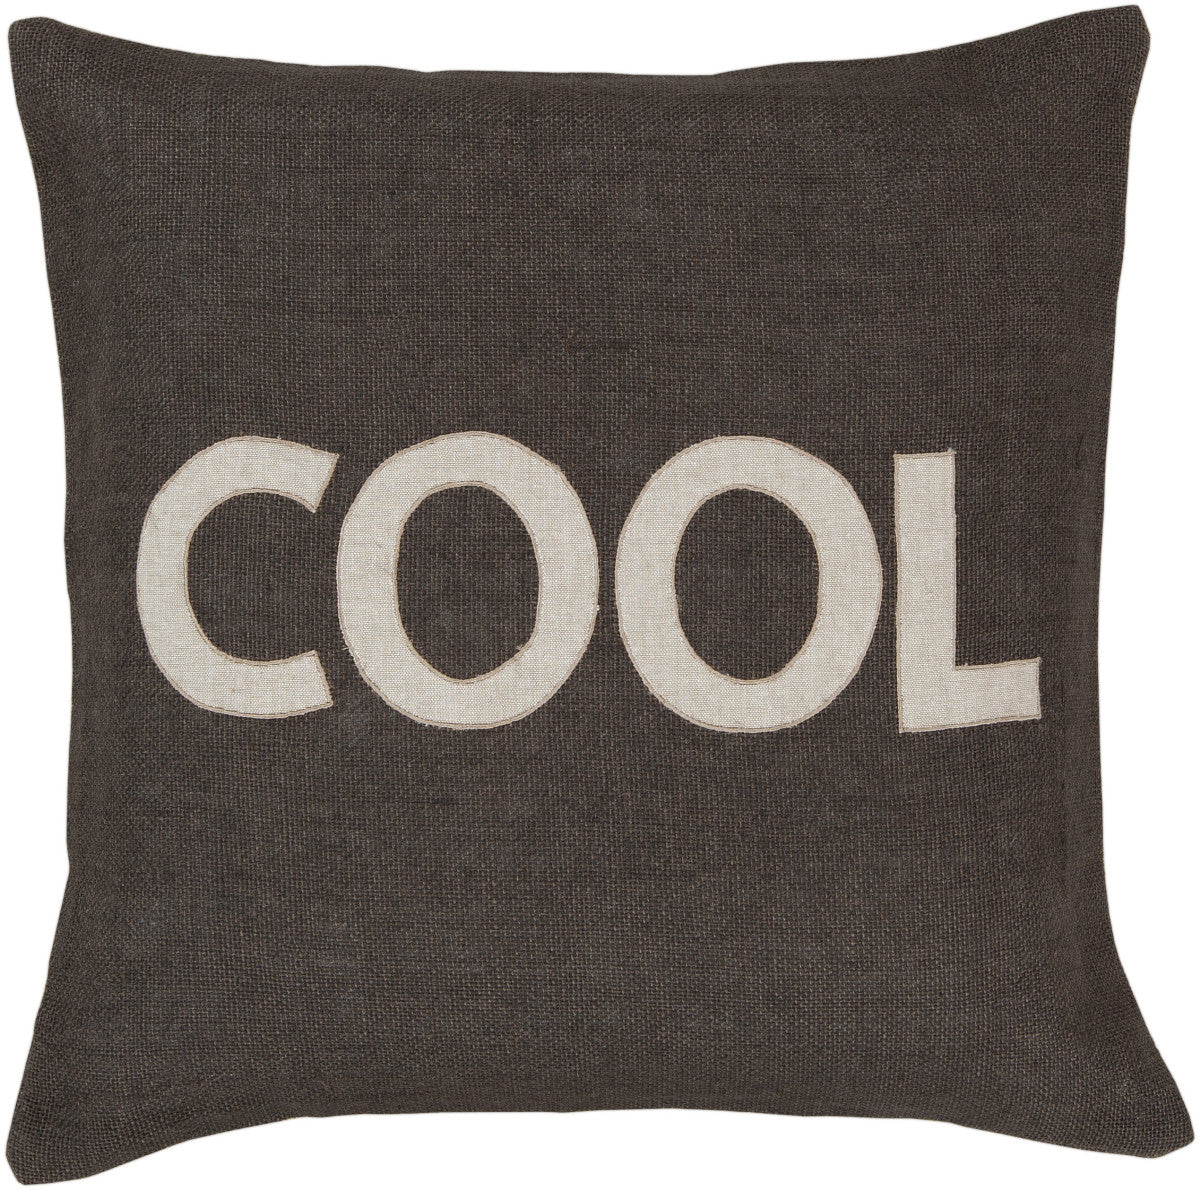 Surya Stencil Charmingly 'Cool' ST-005 Pillow main image